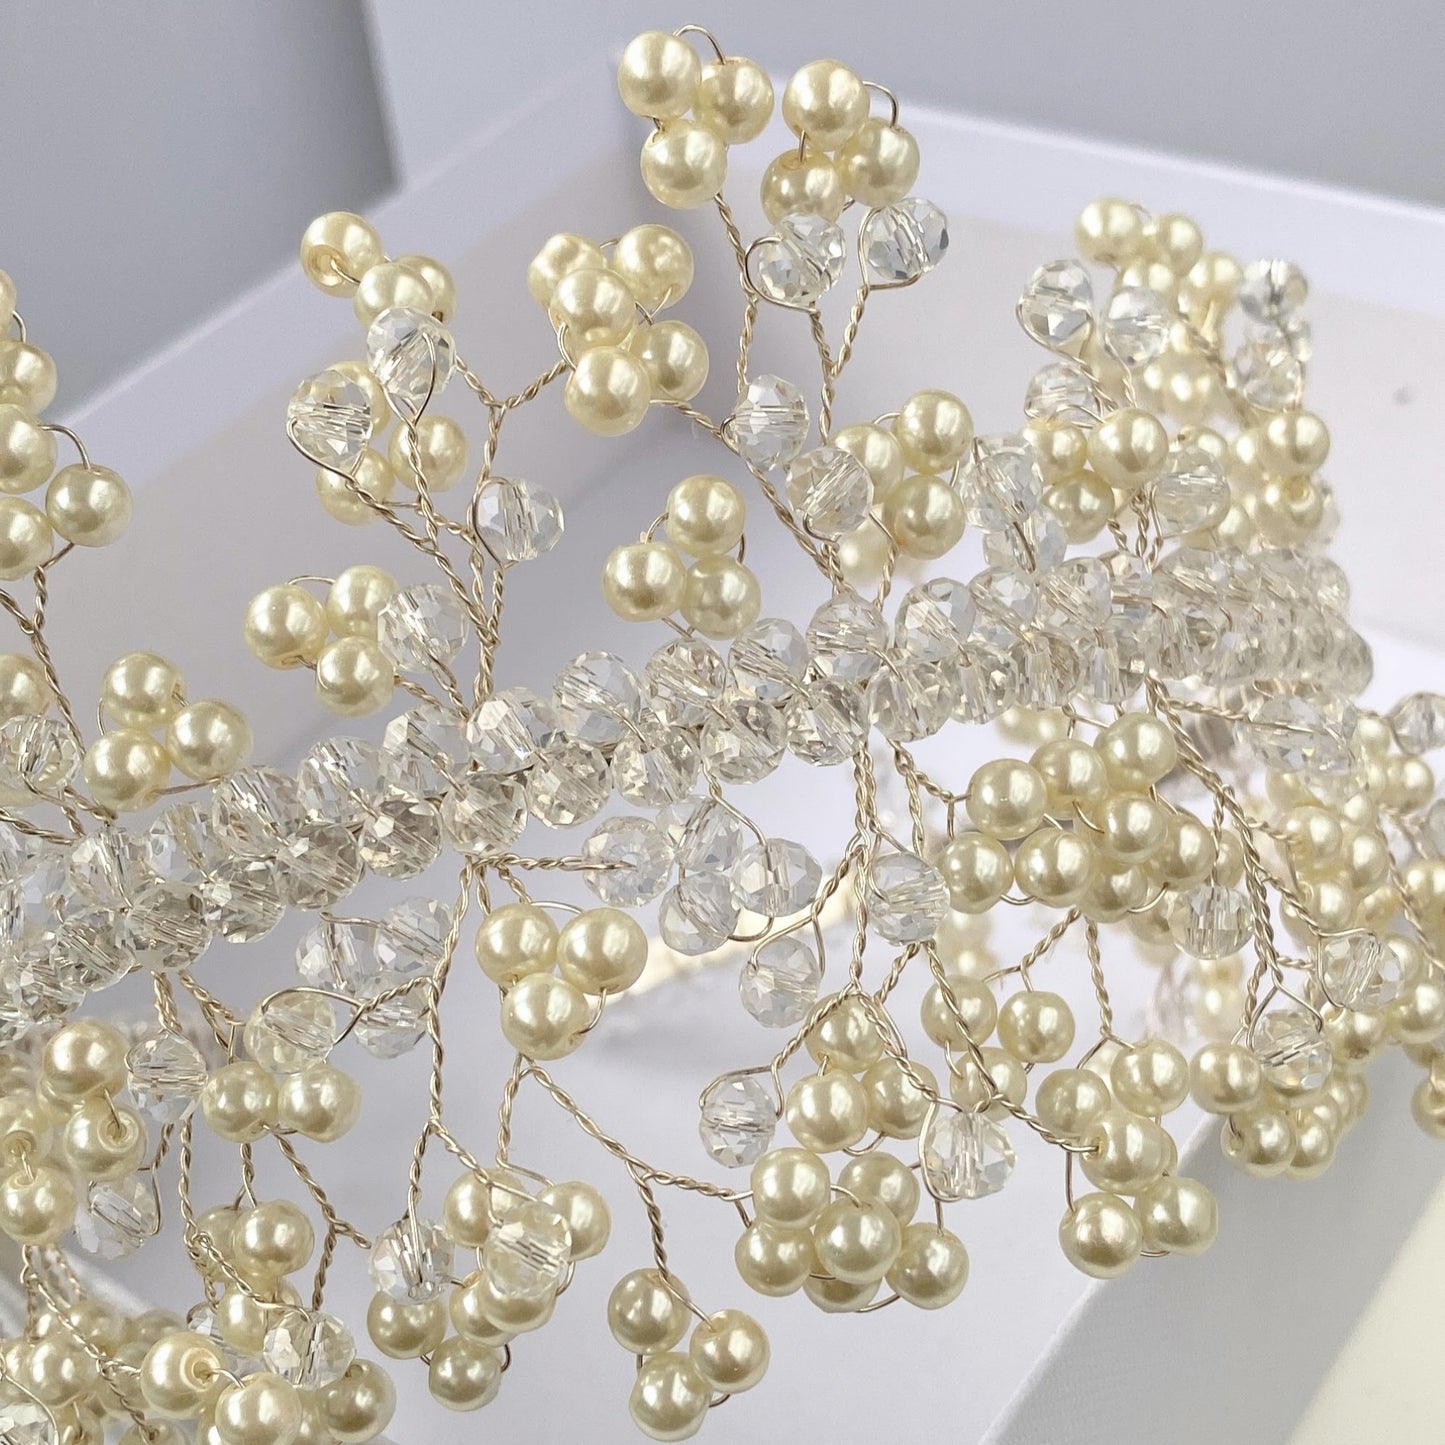 wedding hair vine with pearls and crystals, Minamollie design